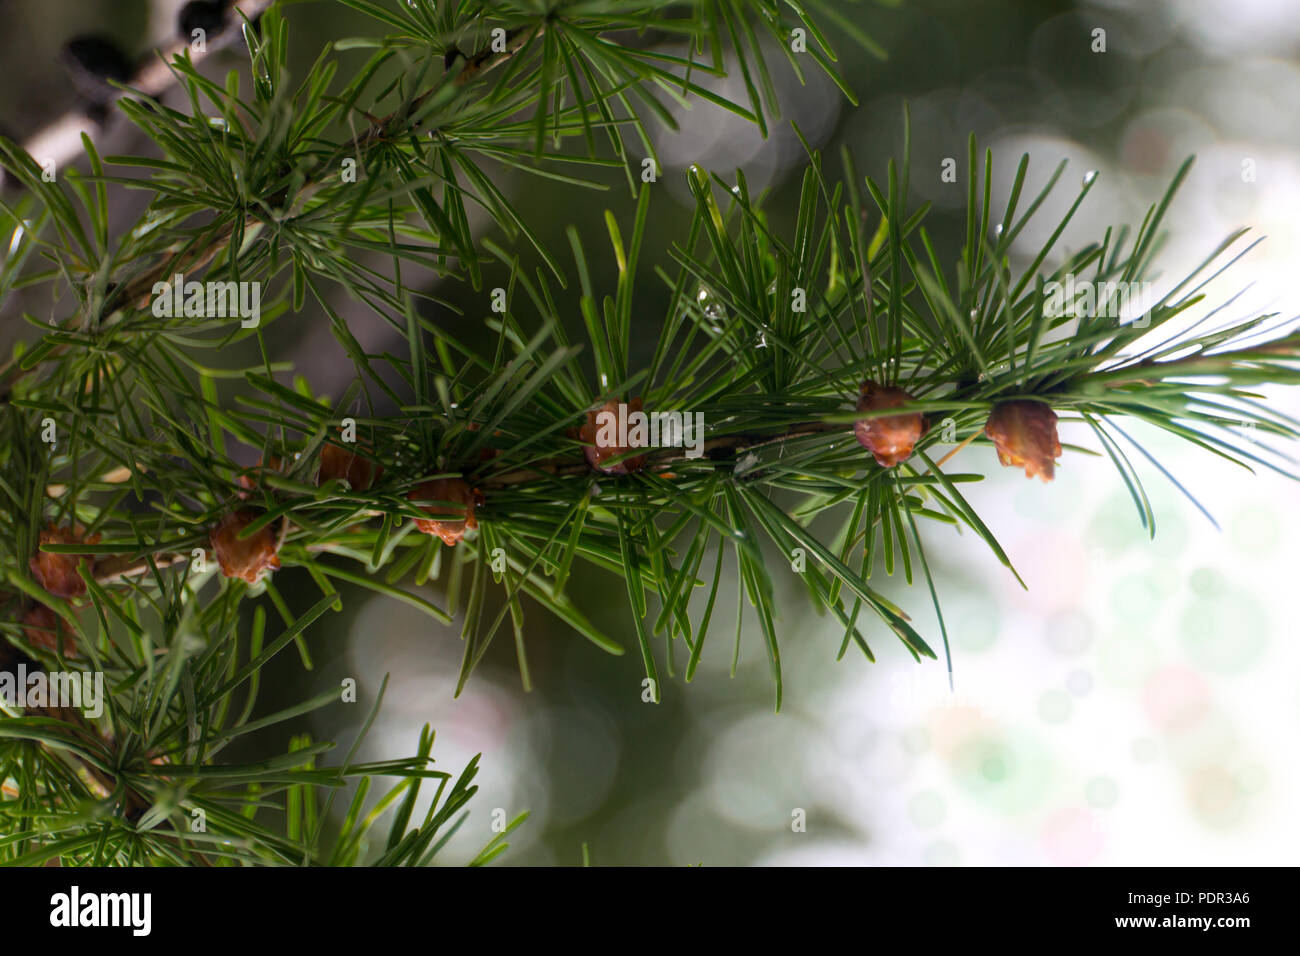 Green branches of larch with small cones. Macro larch needles with fresh dew drops. Stock Photo